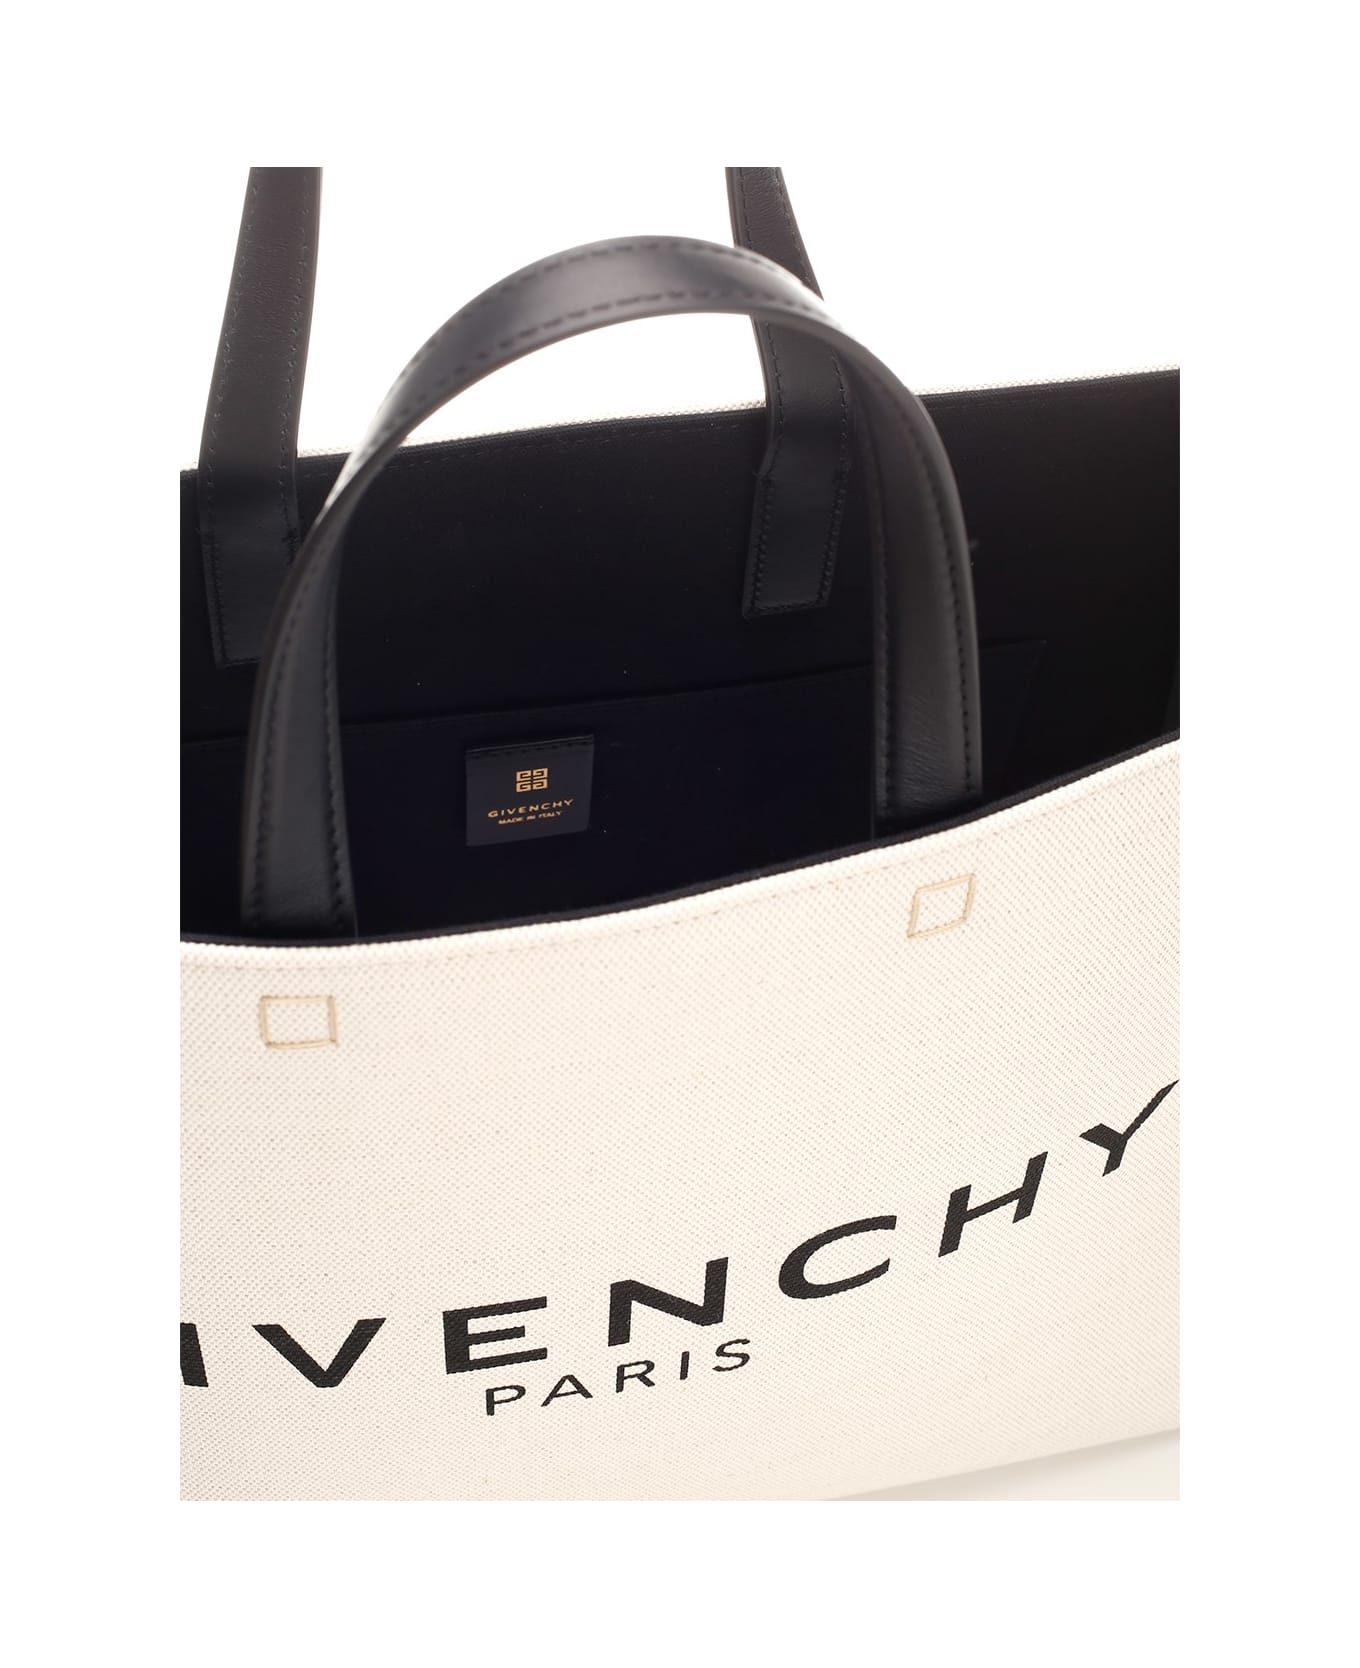 Givenchy 'g' Canvas Tote Bag - Beige